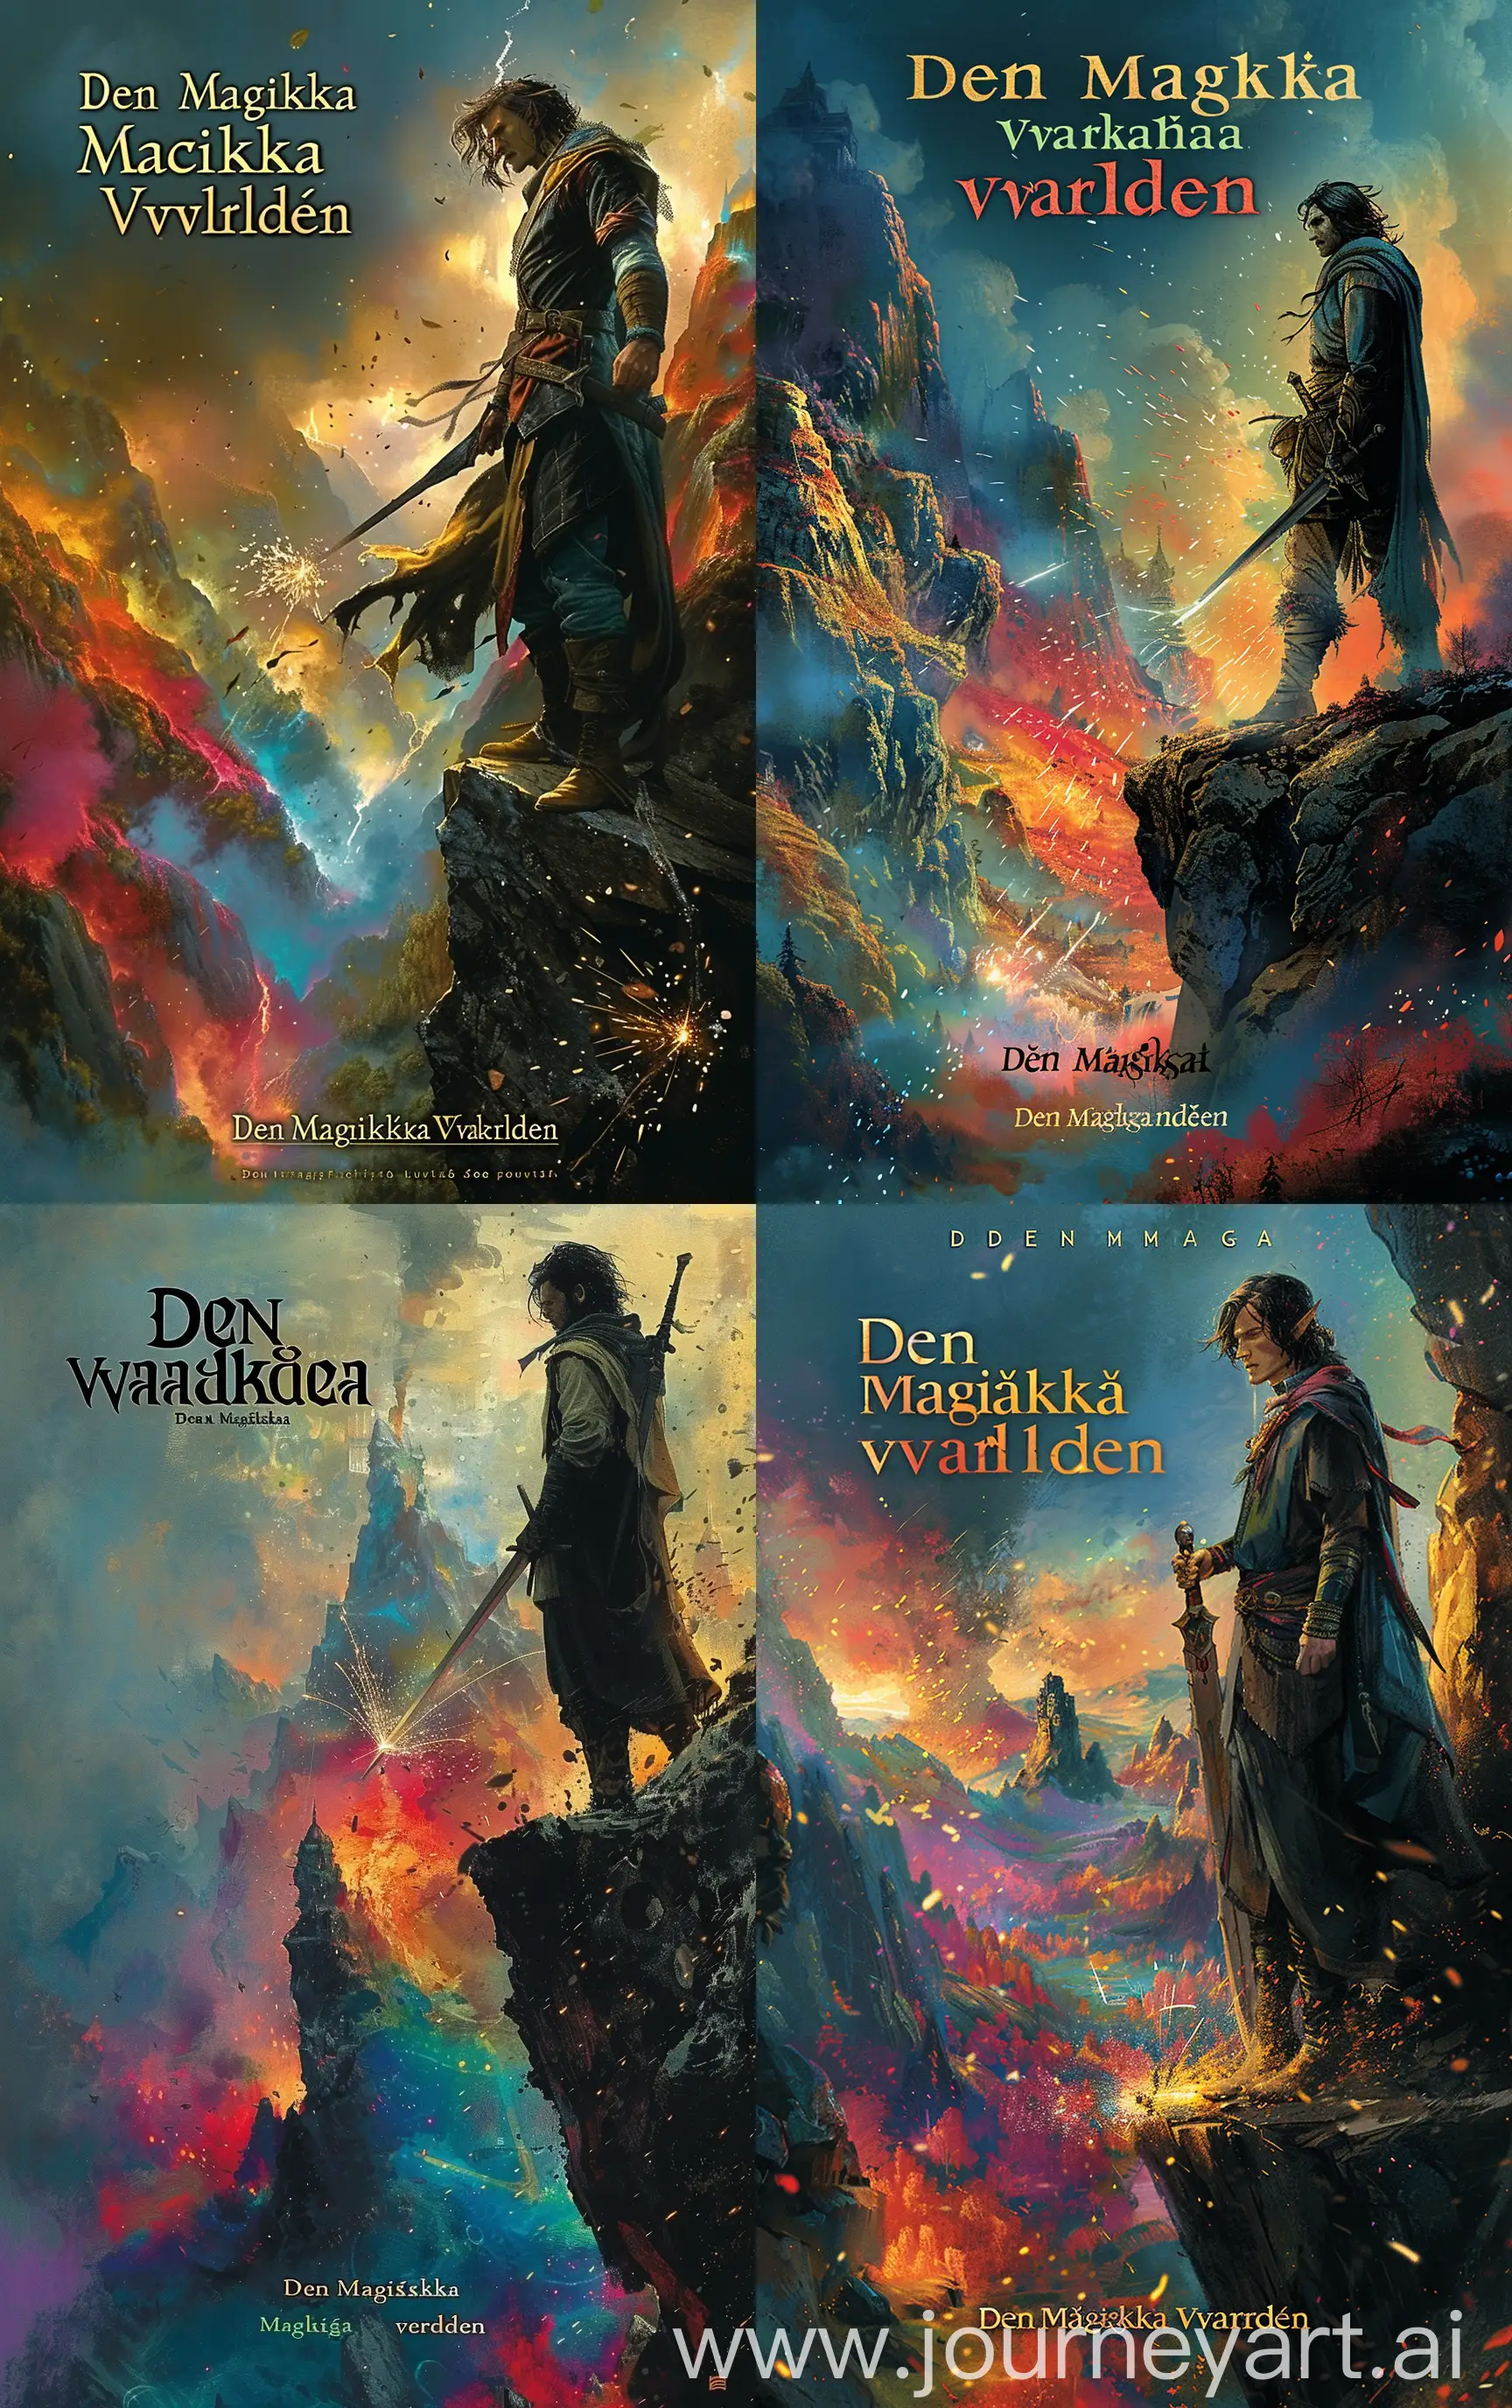 detailed plain book cover with title/subtitle/author names, The cover features a male warrior standing on a cliff, overlooking a vast fantasy world. The warrior is positioned to the right side of the cover, with his gaze directed towards the colorful landscape. A sword is held in his hand, while sparks of magic emanate from his other hand. Its title is "Den magiska världen". The title "Den magiska världen" is displayed in a bold, mystical font, with the word "magiska" having an ethereal glow. The author's name is placed at the bottom of the cover in a more elegant and flowing font., The warrior is placed on the right side of the cover, allowing the colorful fantasy world to take up the majority of the space. The title is positioned at the top of the cover, with the author's name at the bottom., --v 6 --stylize 800 --ar 10:16 --seed 4068376620